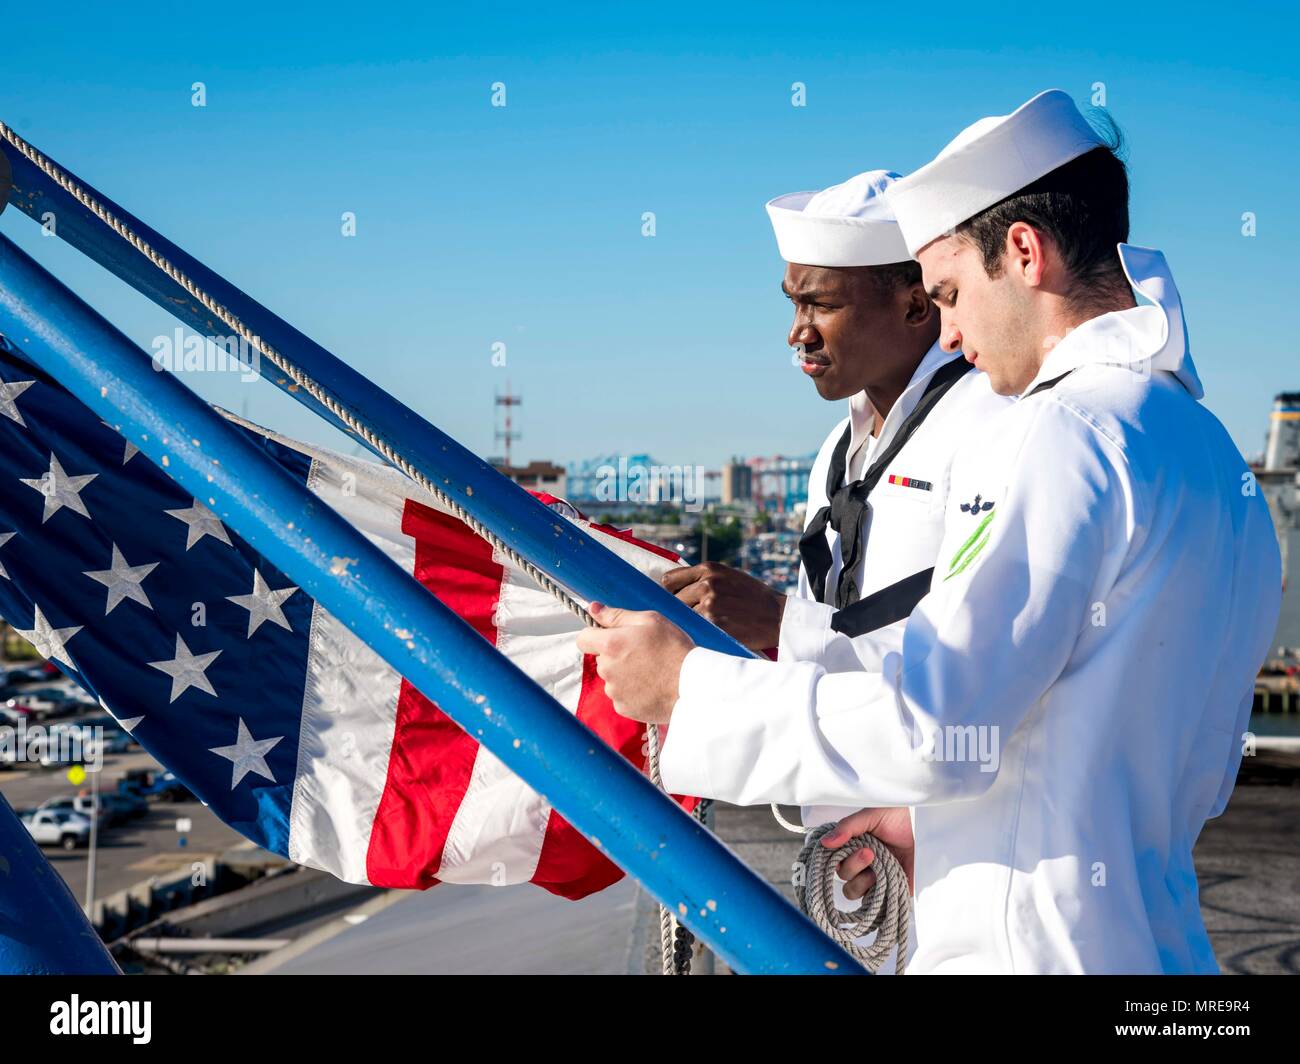 170609-N-FG807-028    NORFOLK, Va. (June 9, 2017)  Aviation Ordnanceman Airman Stephen Jackson, from Auburn, Ala., front, and Aviation Ordnanceman 3rd Class Cyle West, from Great Lakes, prepare to raise the ensign for morning colors aboard the aircraft carrier USS Dwight D. Eisenhower (CVN 69) (Ike). Ike is currently pier side during the sustainment phase of the Optimized Fleet Response Plan (OFRP). (U.S. Navy photo by Mass Communication Specialist Seaman Devin A. Lowe) Stock Photo